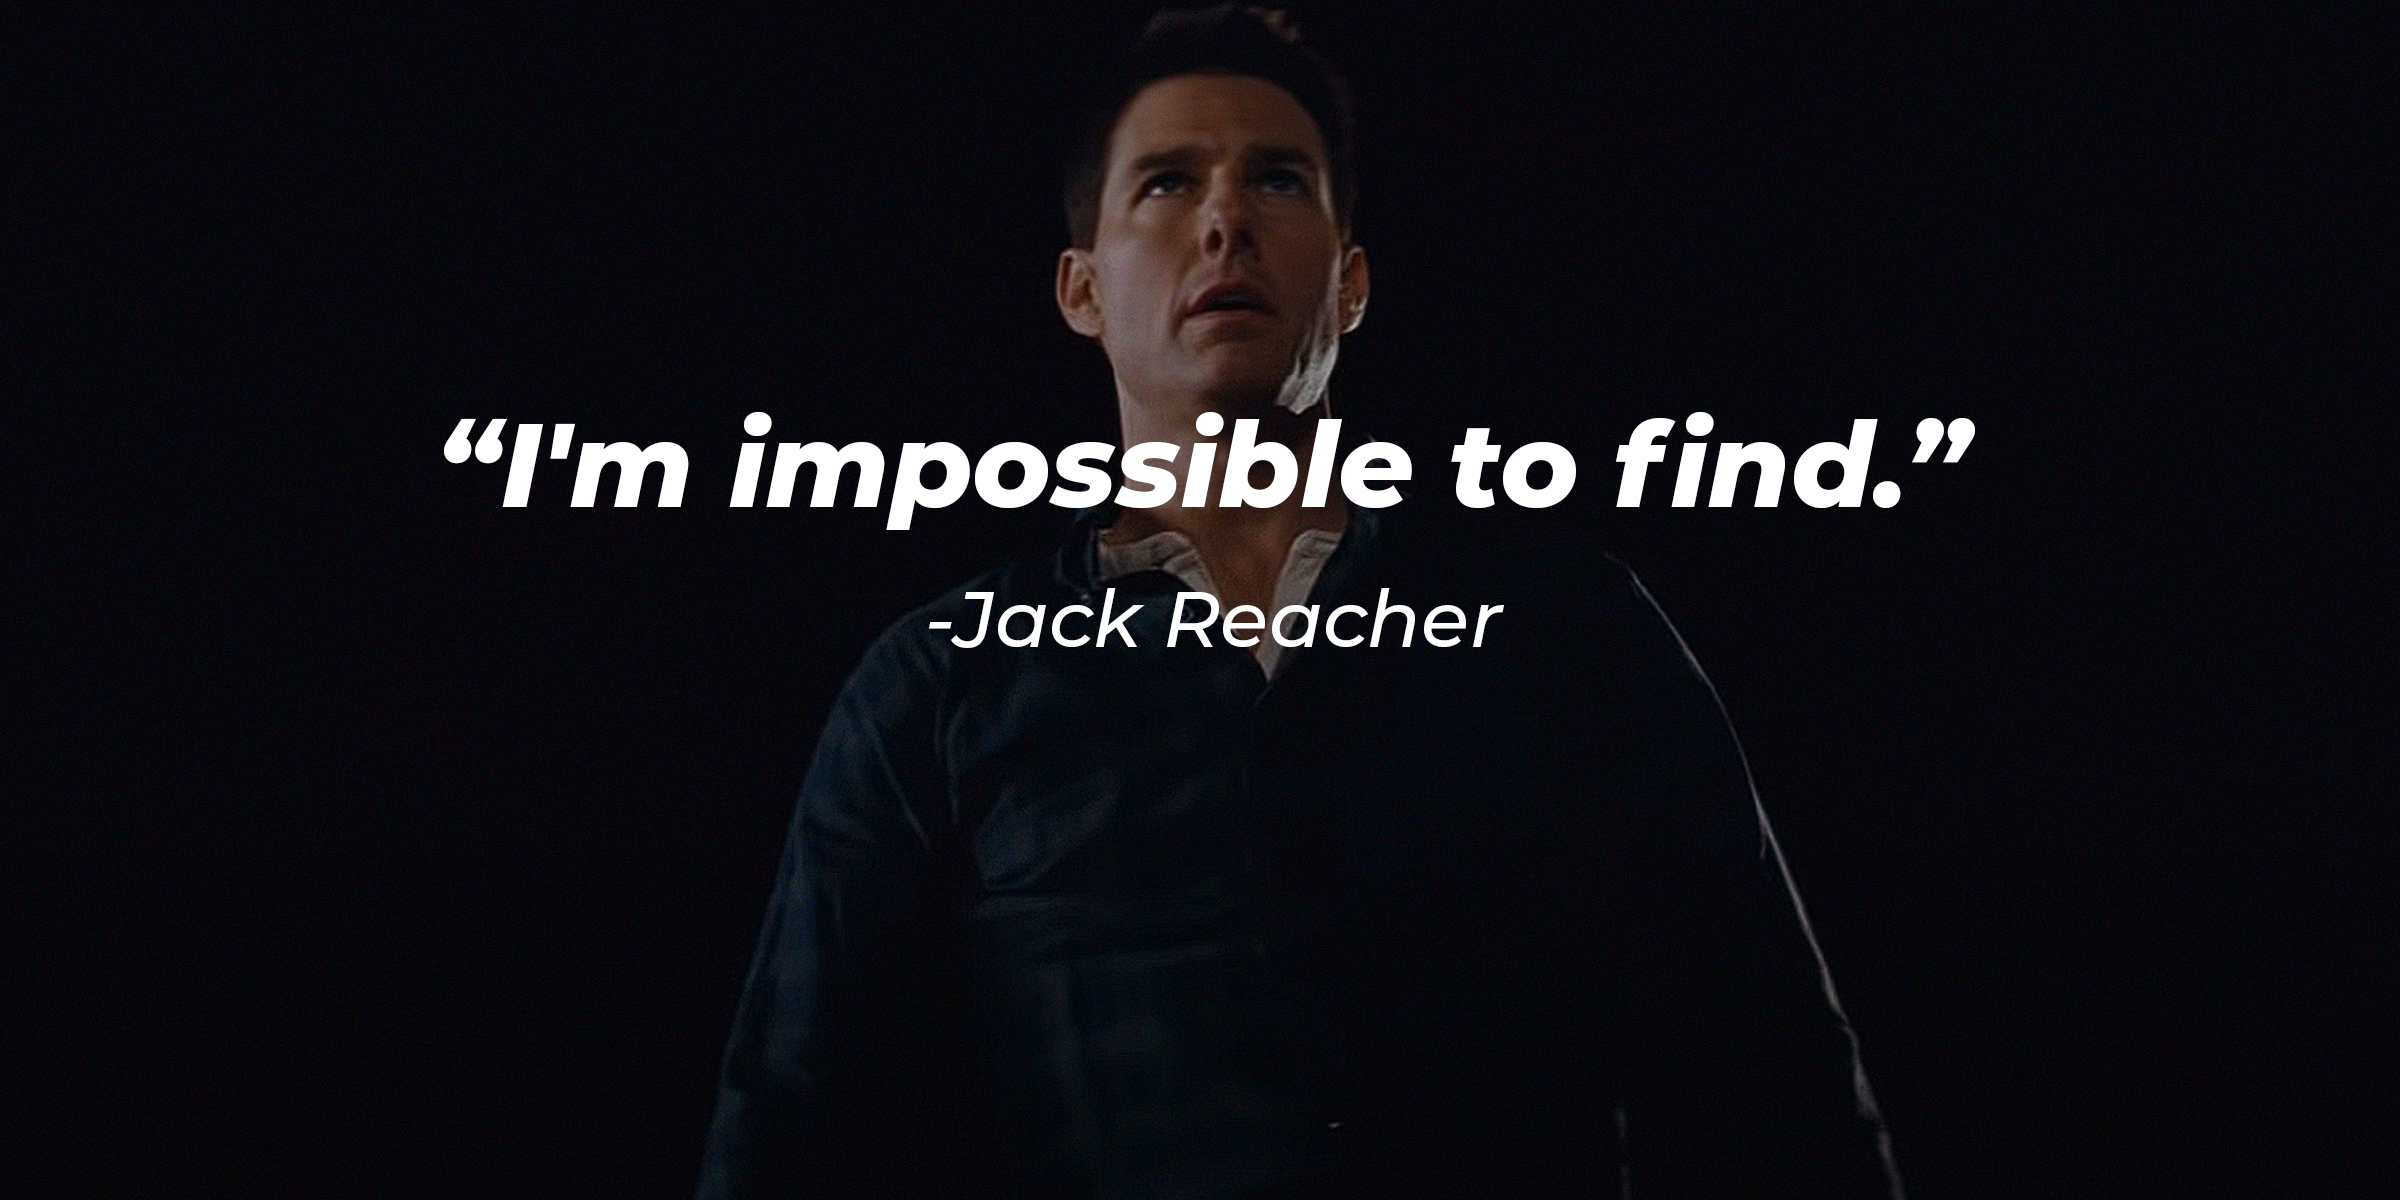 Jack Reacher's quote: "I'm impossible to find" | Source: Youtube.com/paramountpictures